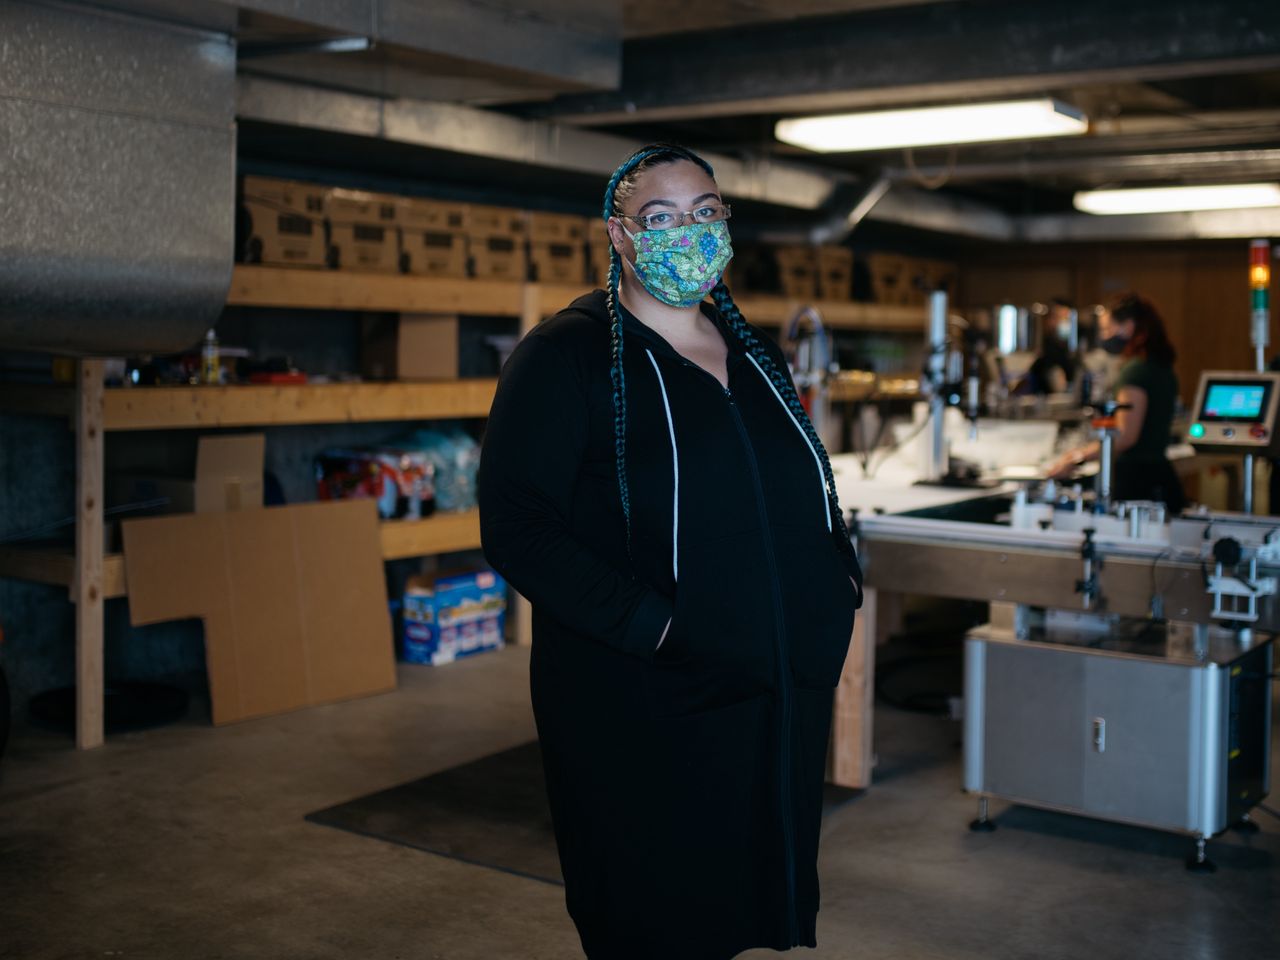 Sherae Lascelles, founder of Seattle’s Green Light Project, a nonprofit that gives sanitation products and cash to sex workers, got the idea of making hand sanitizer after supplies began to run out in early March.